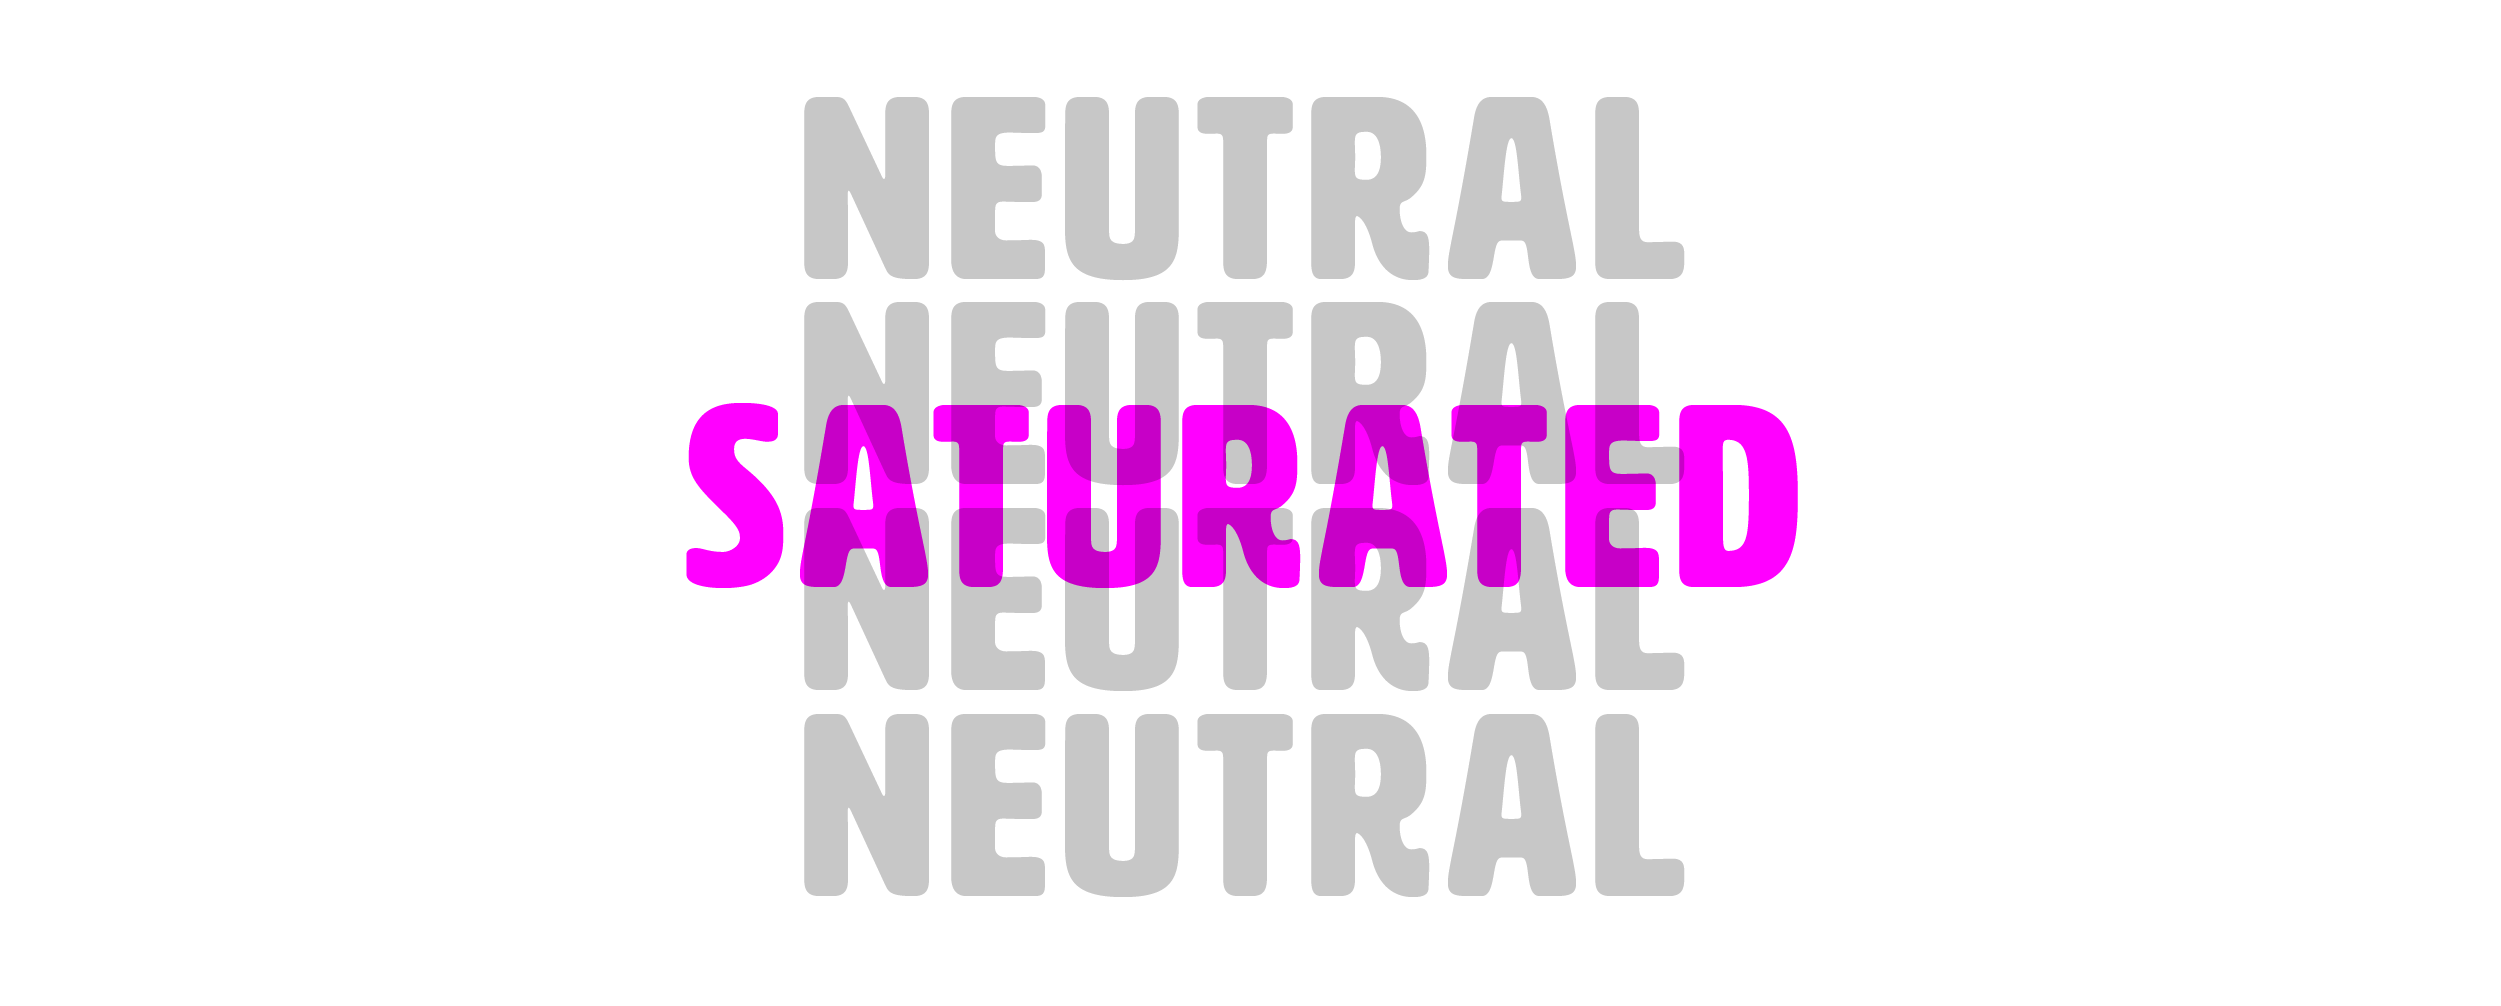 the word "neutral" repeated four times vertically in light gray with a hot pink magenta word on top that reads "saturated"